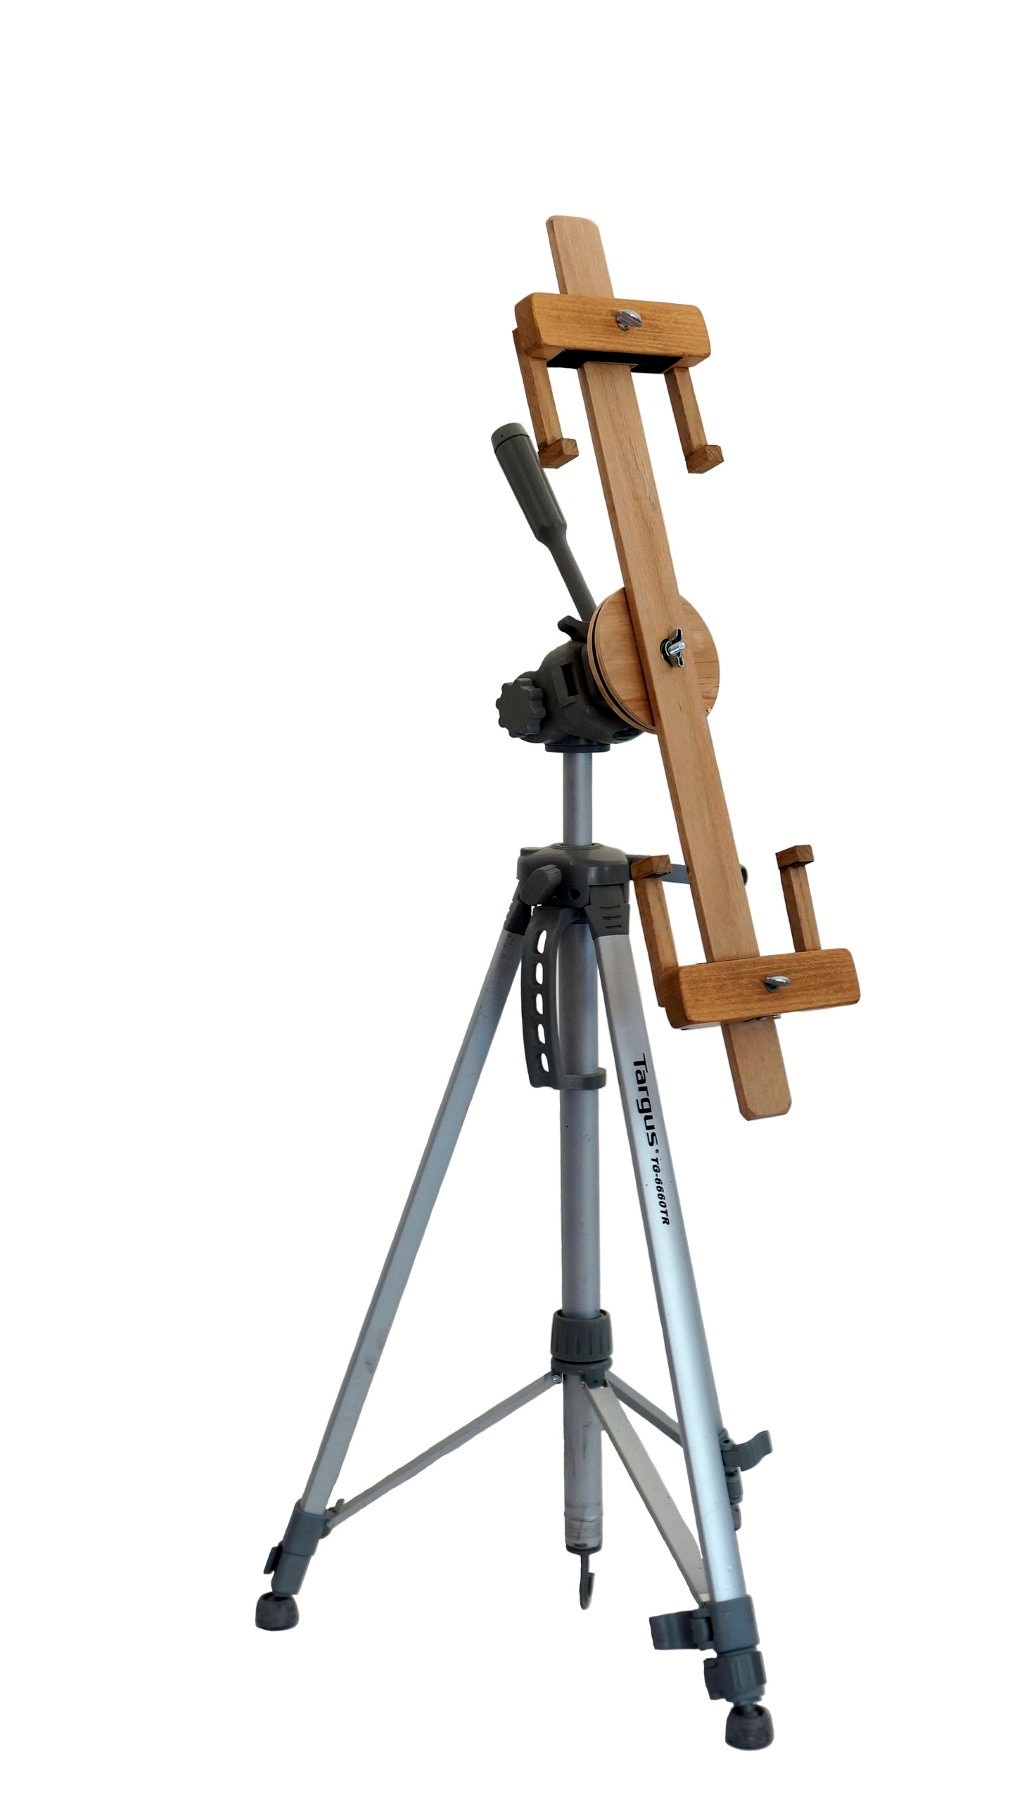 STUDIO Easel by Artristic - Rotates Tilts, Spins. Paint Sitting or Standing